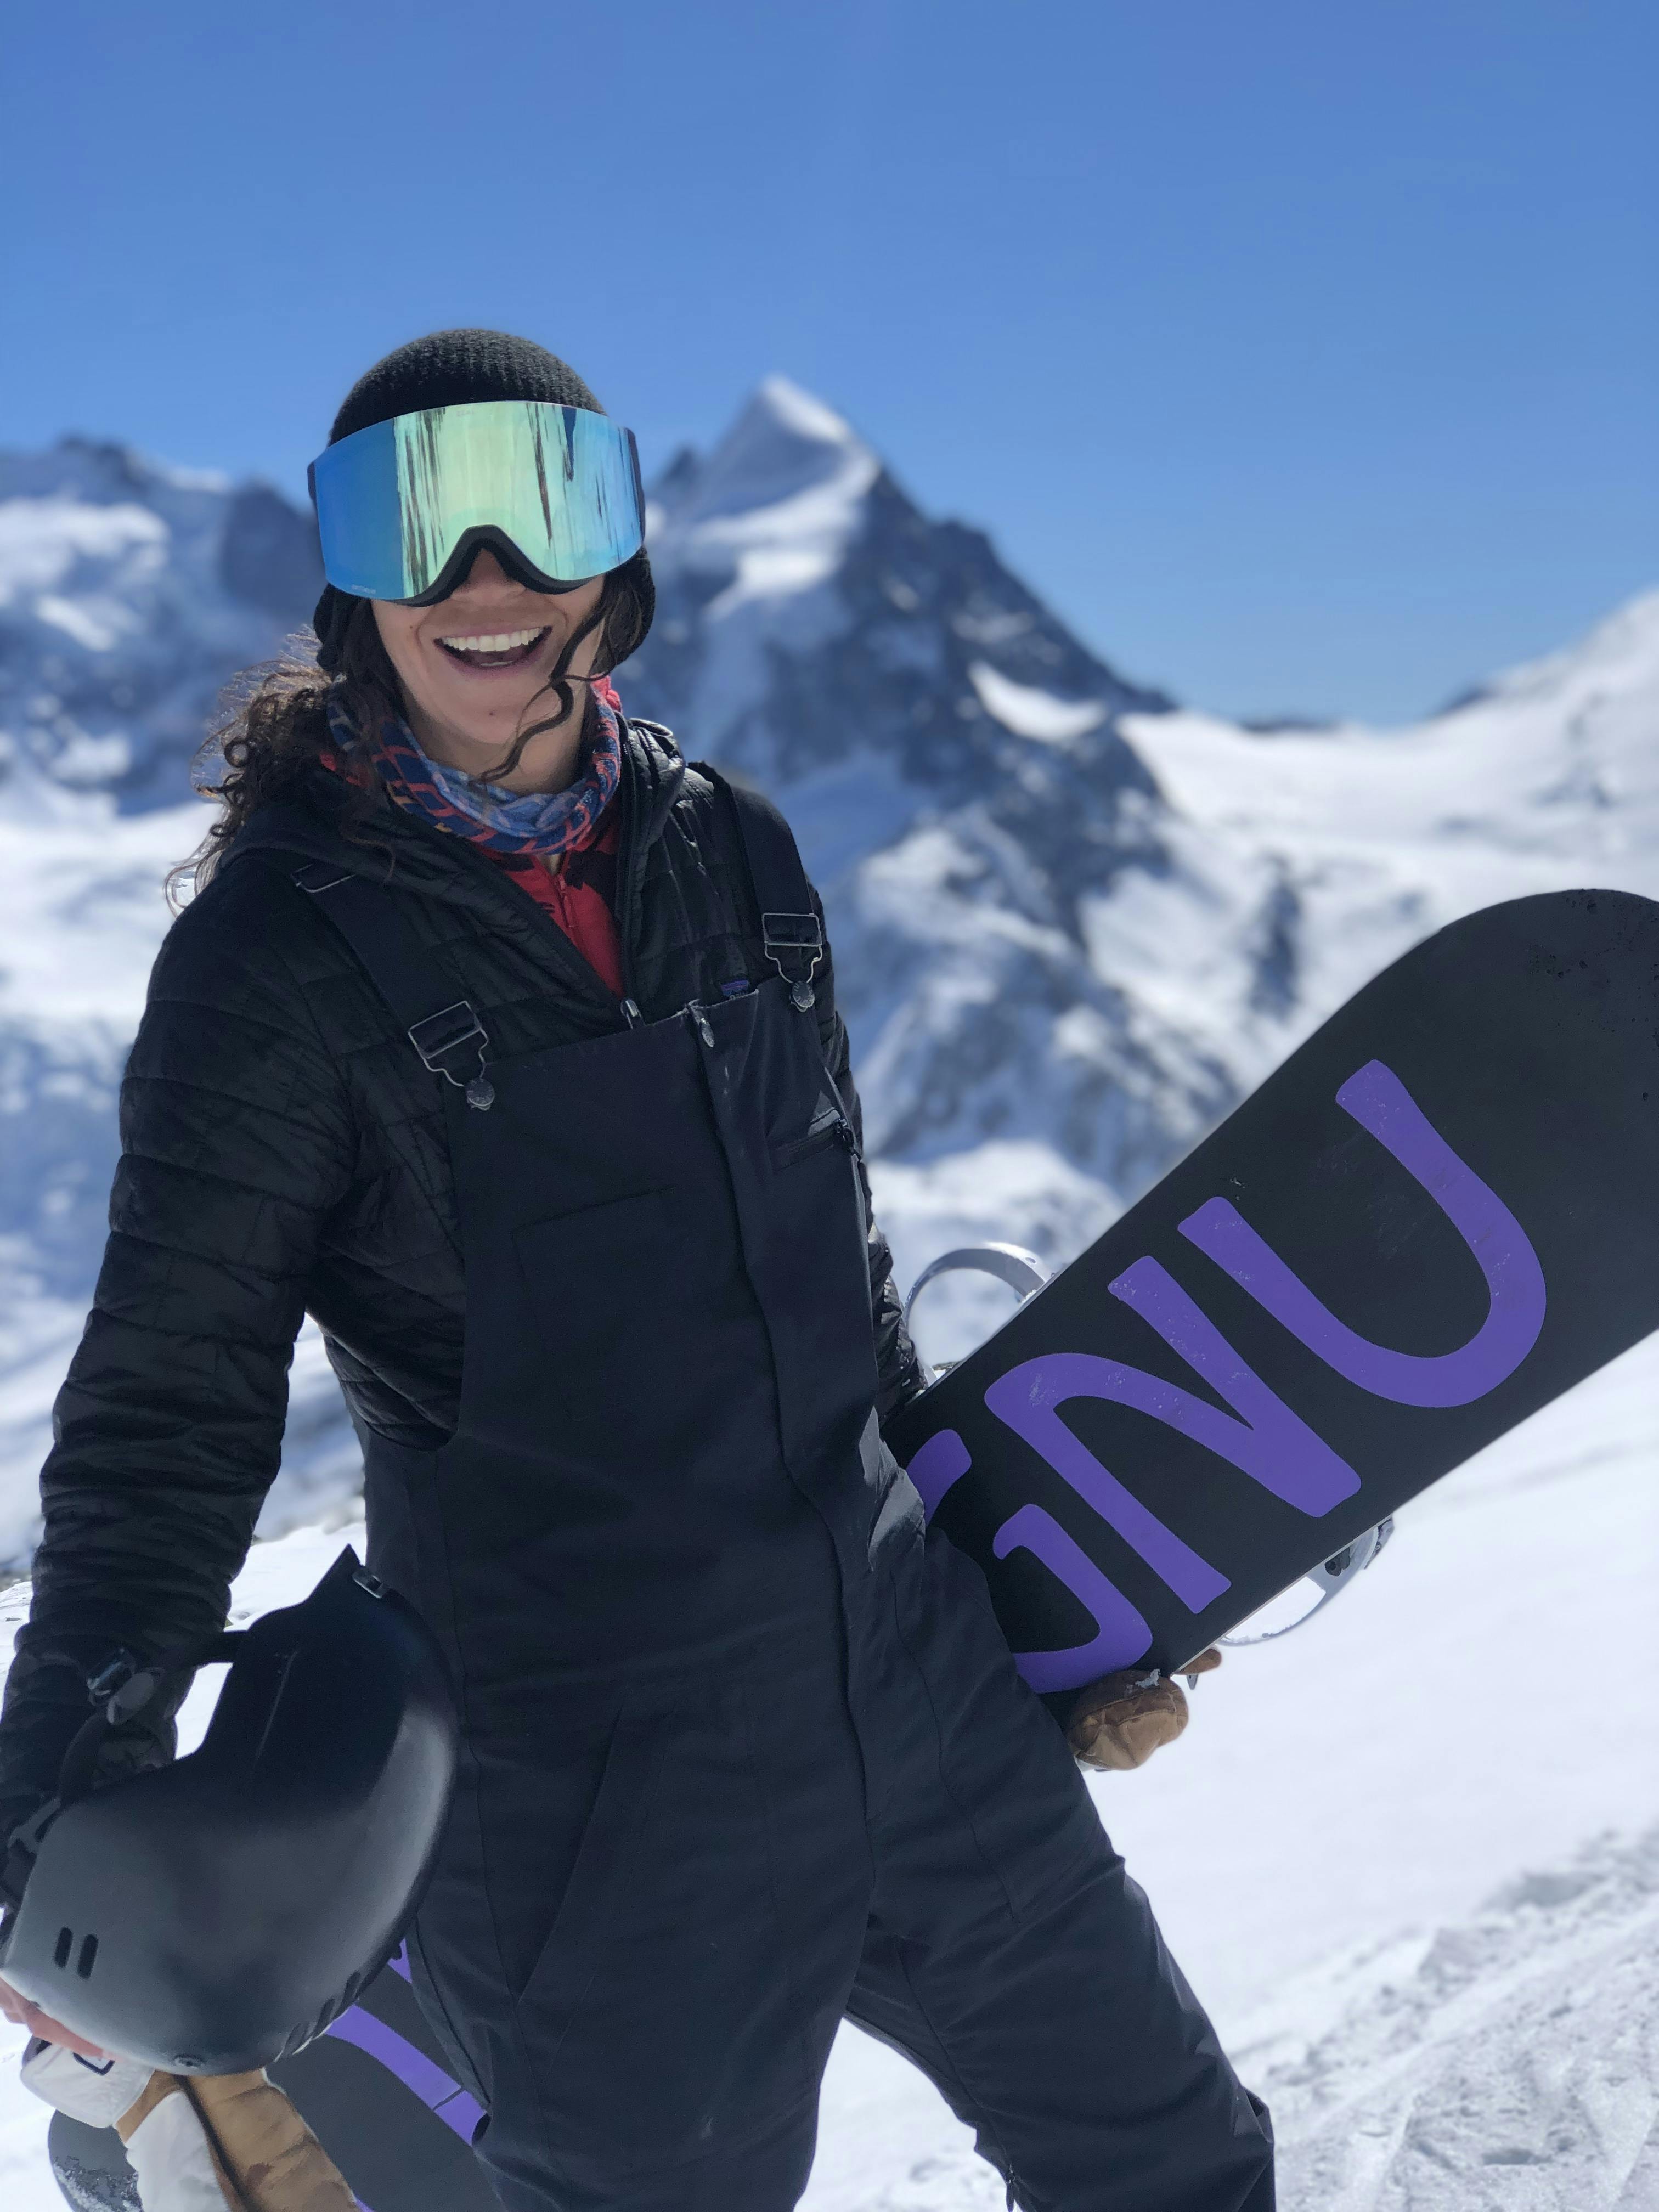 A snowboarder holding her snowboard and wearing the Zeal Optics Beacon Goggles · 2021. 